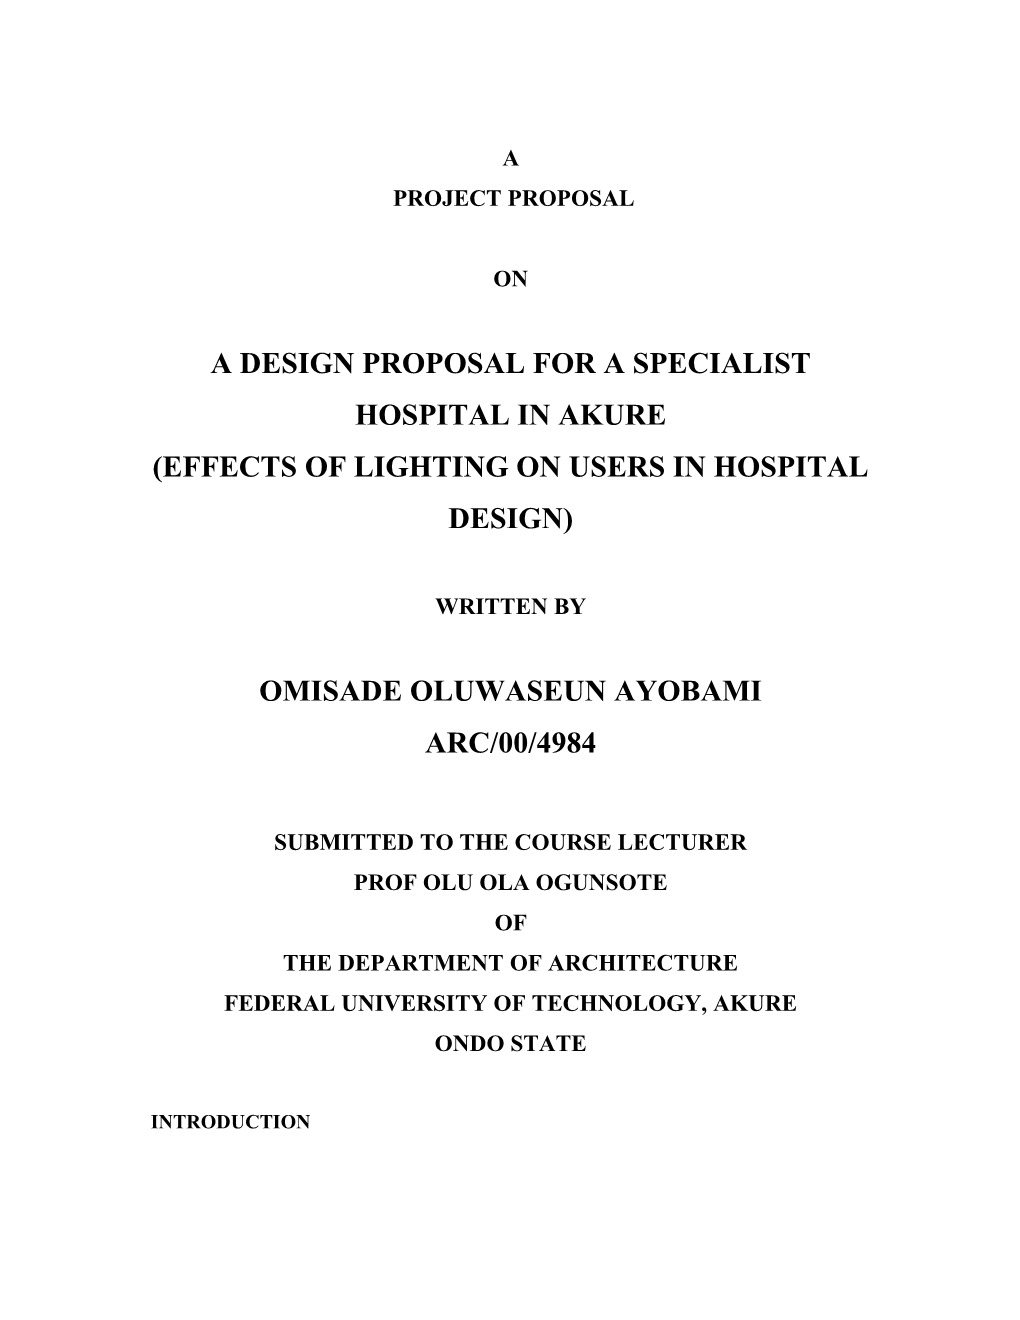 Medical Facility Staff Can Also Benefit from Better Lighting